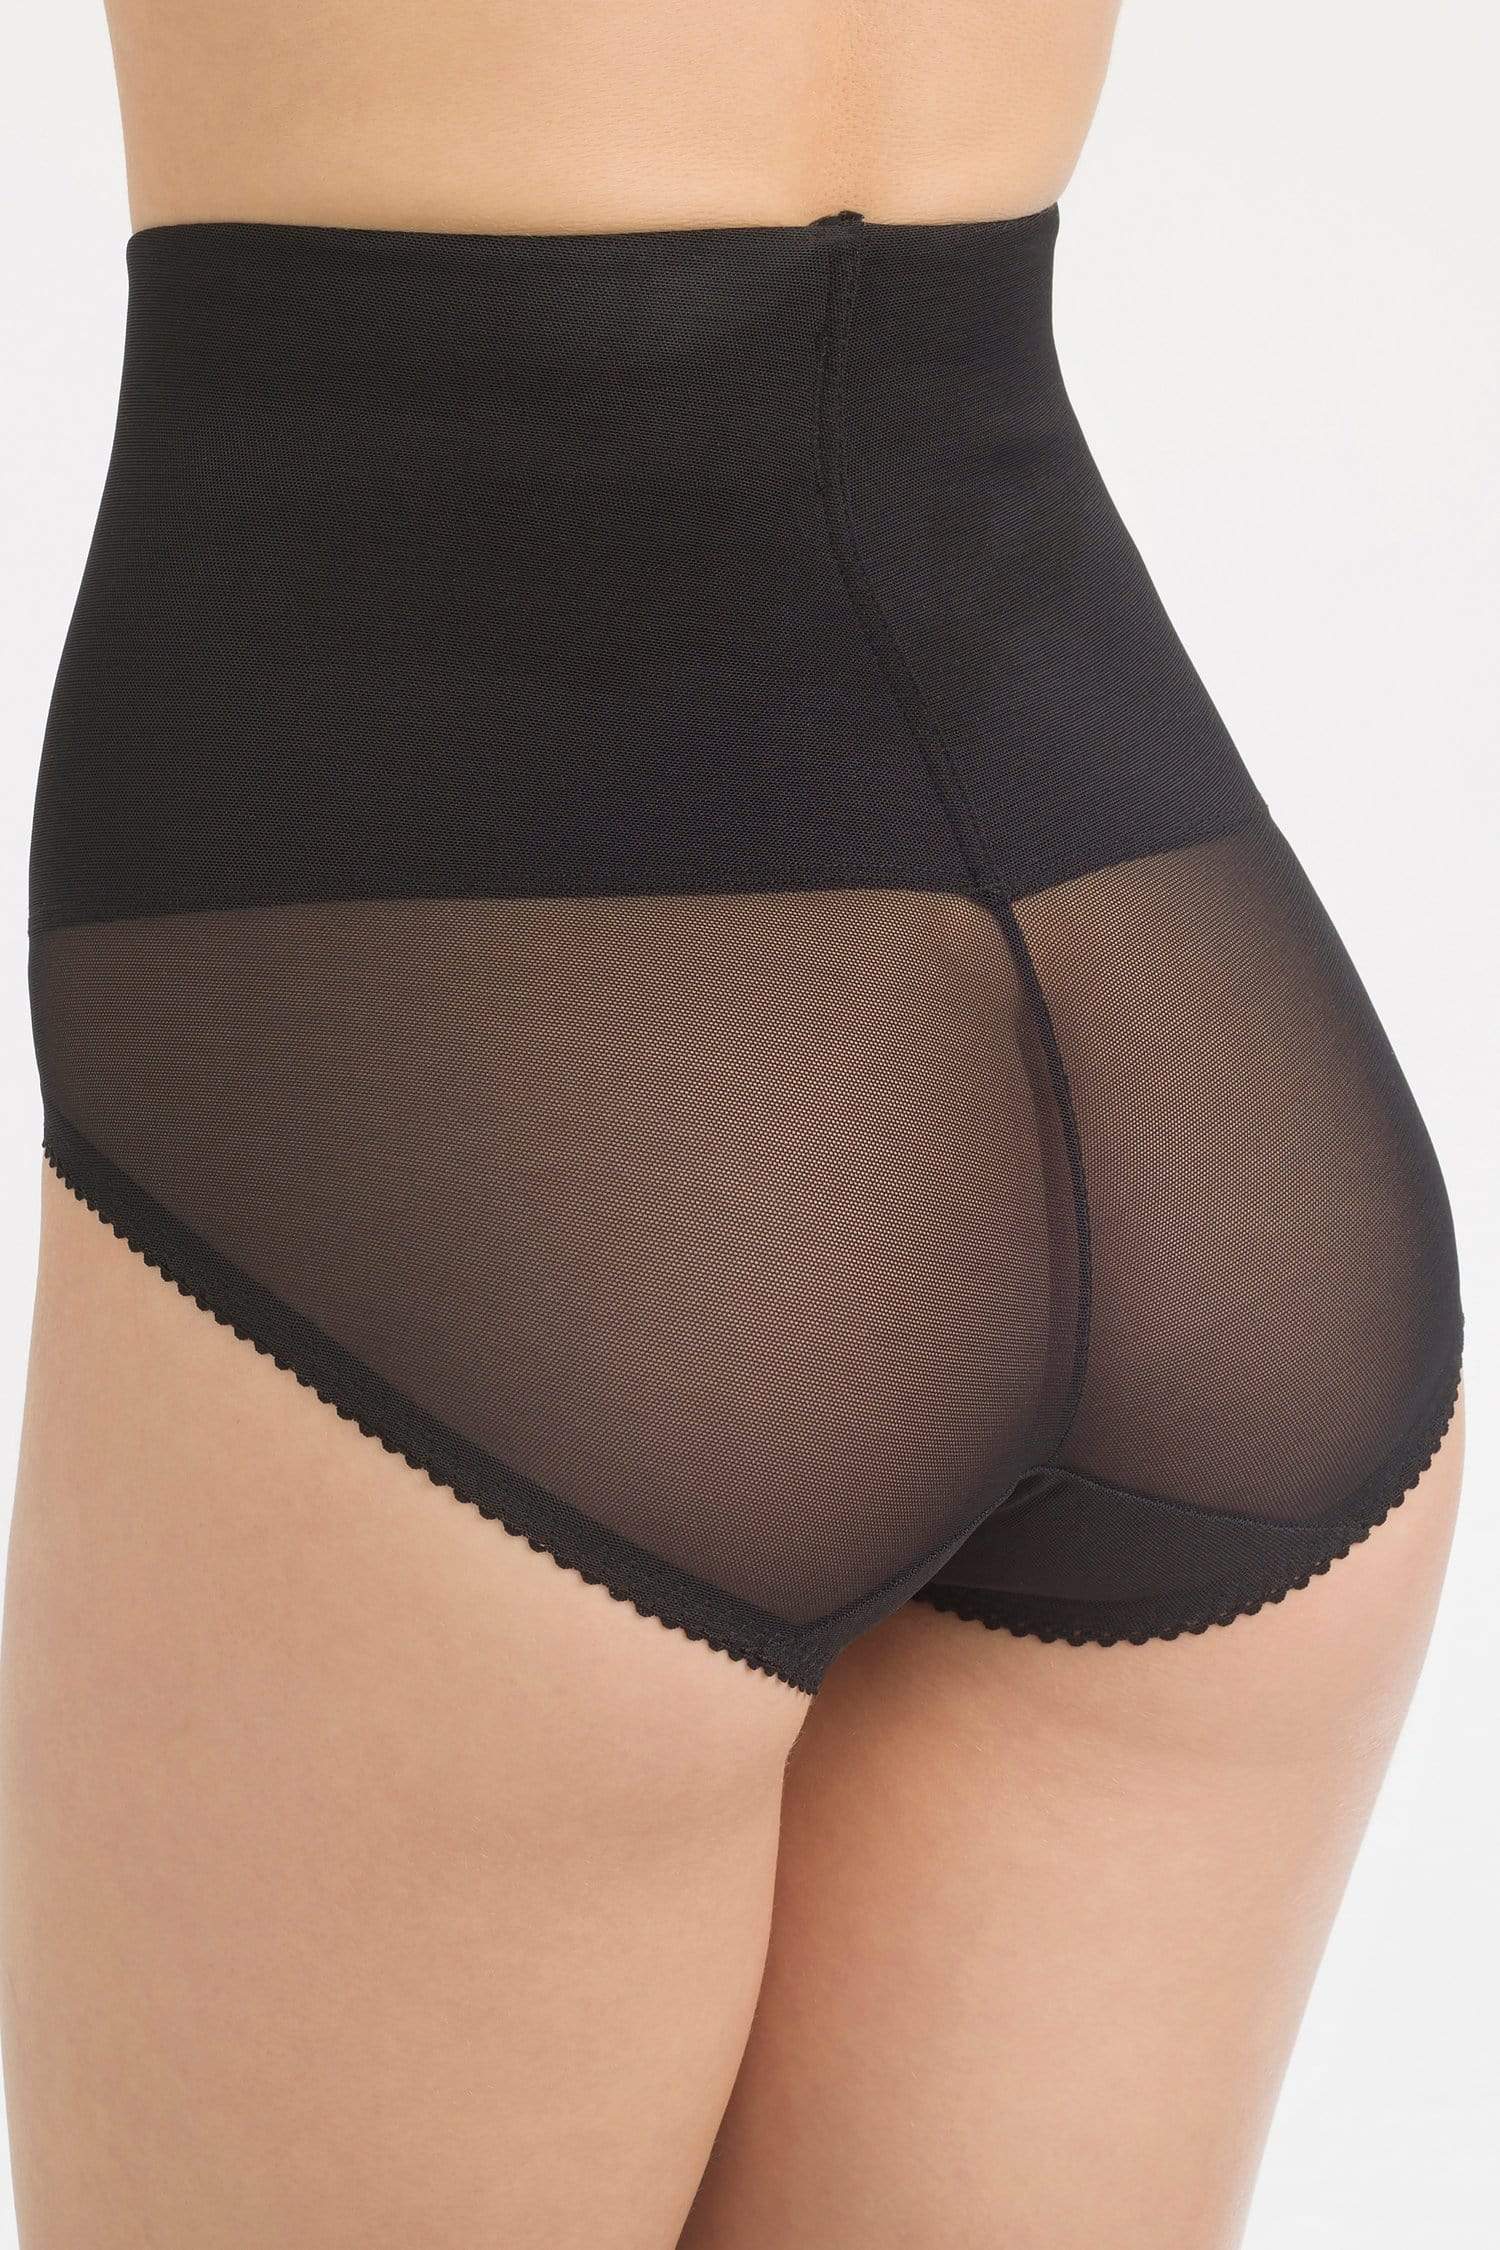 RAGO Style 940 - High Waist Light to Moderate Shaping Panty Brief CLEARANCE